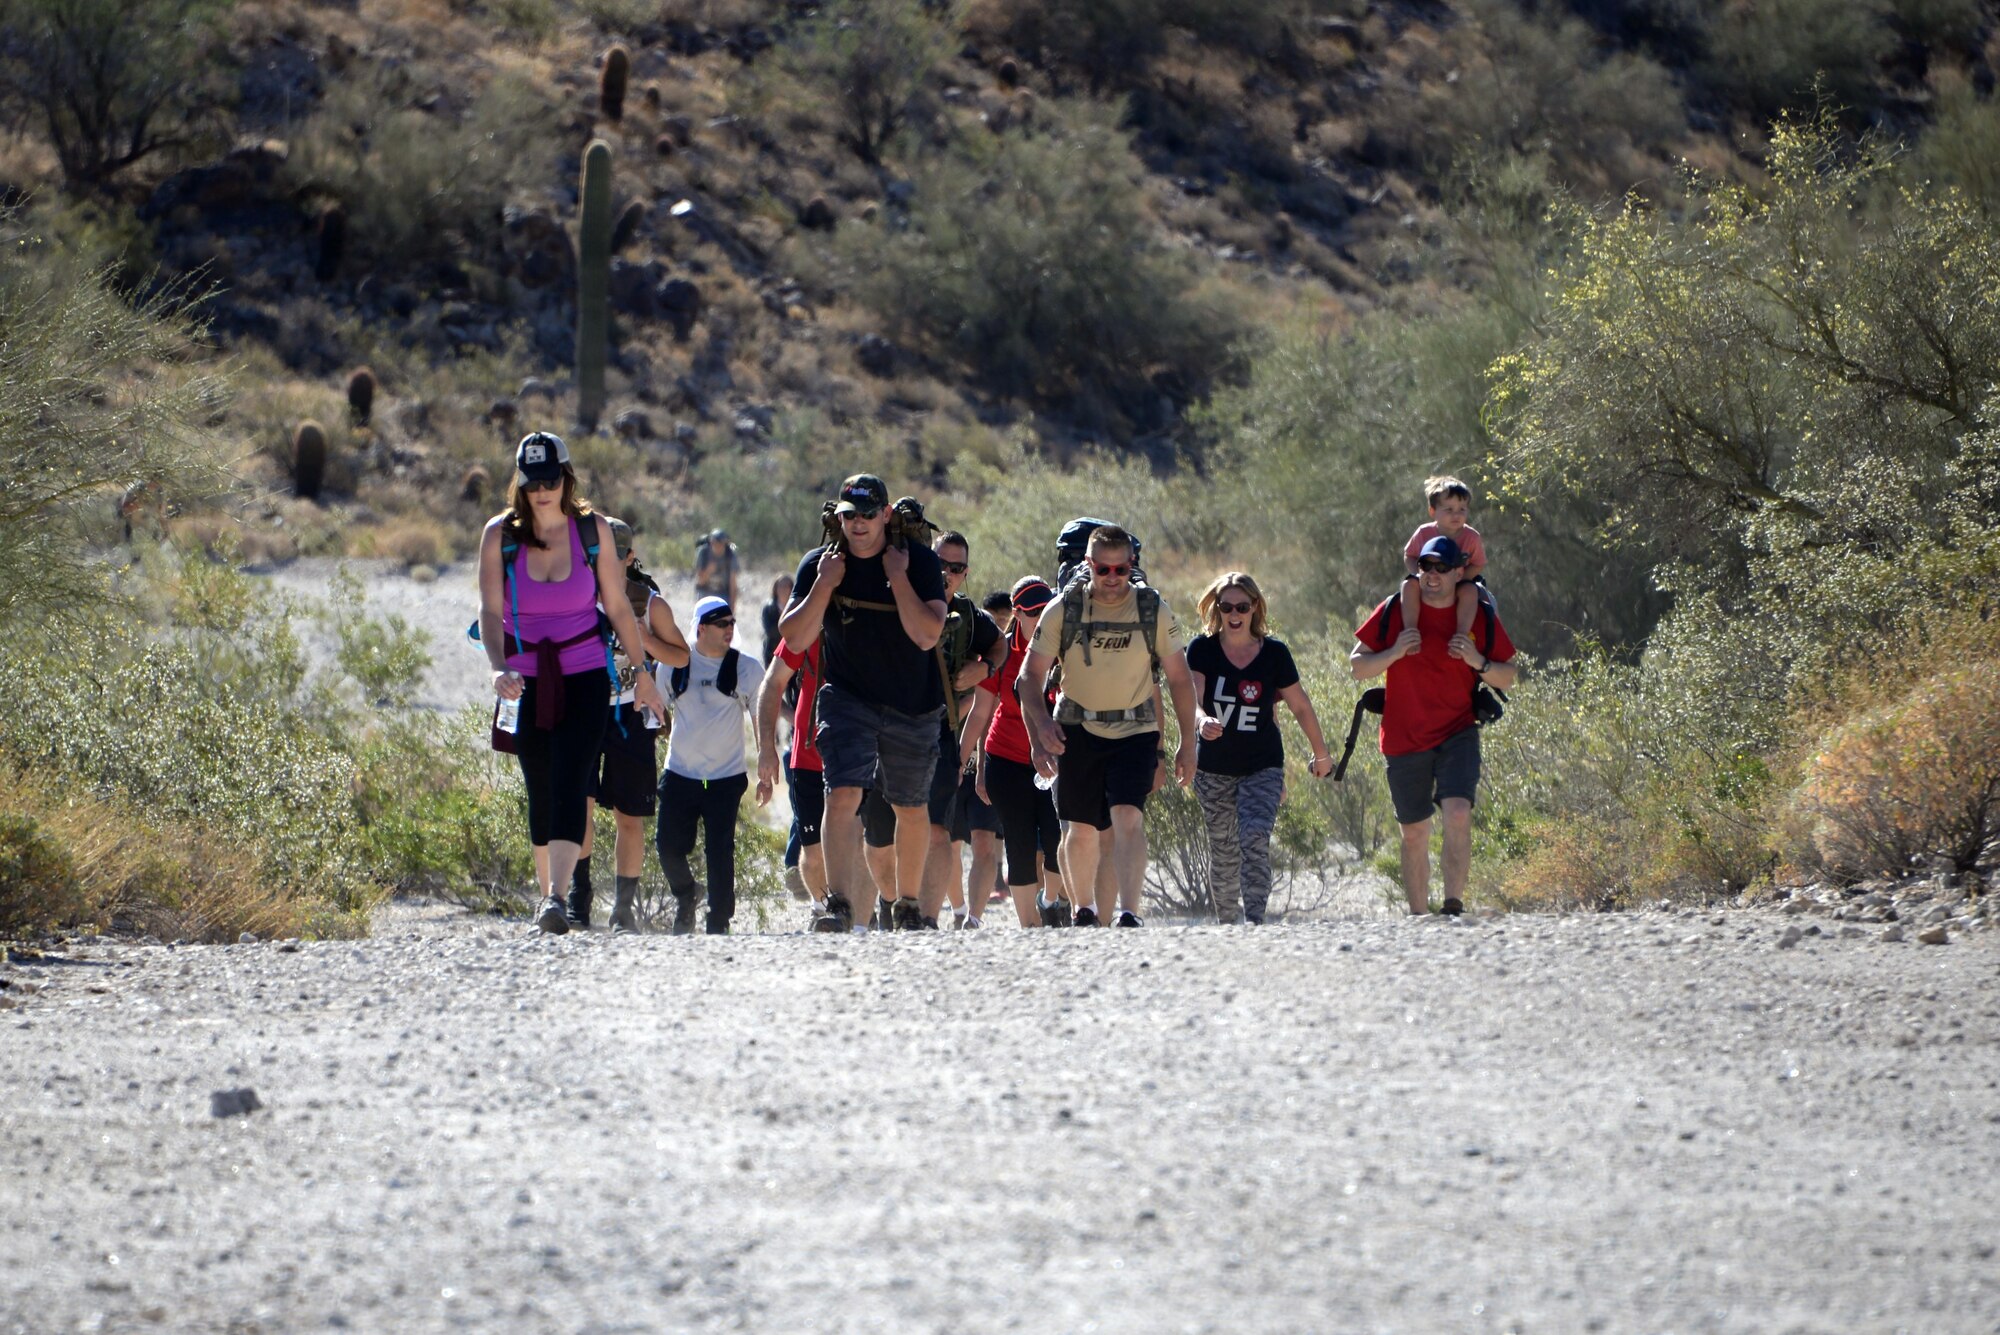 March of the Fallen participants hike through White Tank Mountain Regional Park April 29, 2017 in Waddell, Ariz.  The MOTF is a 4.5-mile rucksack march dedicated to honoring those who gave their lives during Operation Enduring Freedom, Operation Iraqi Freedom and Operation New Dawn.(U.S. Air Force photo by Devante Williams)